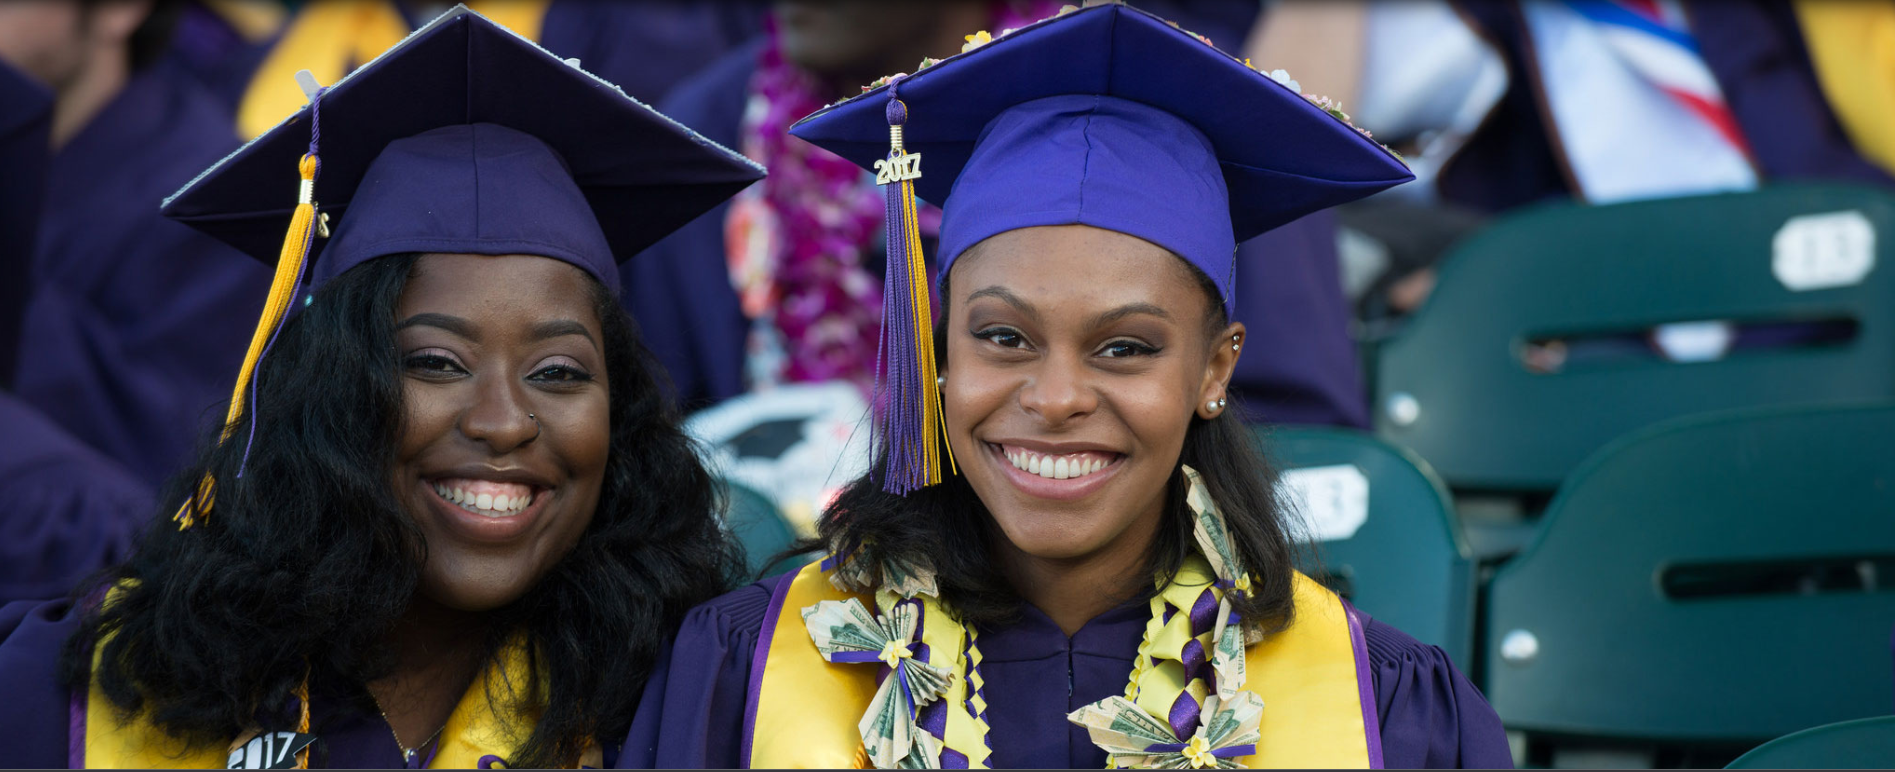 Two female students at graduation